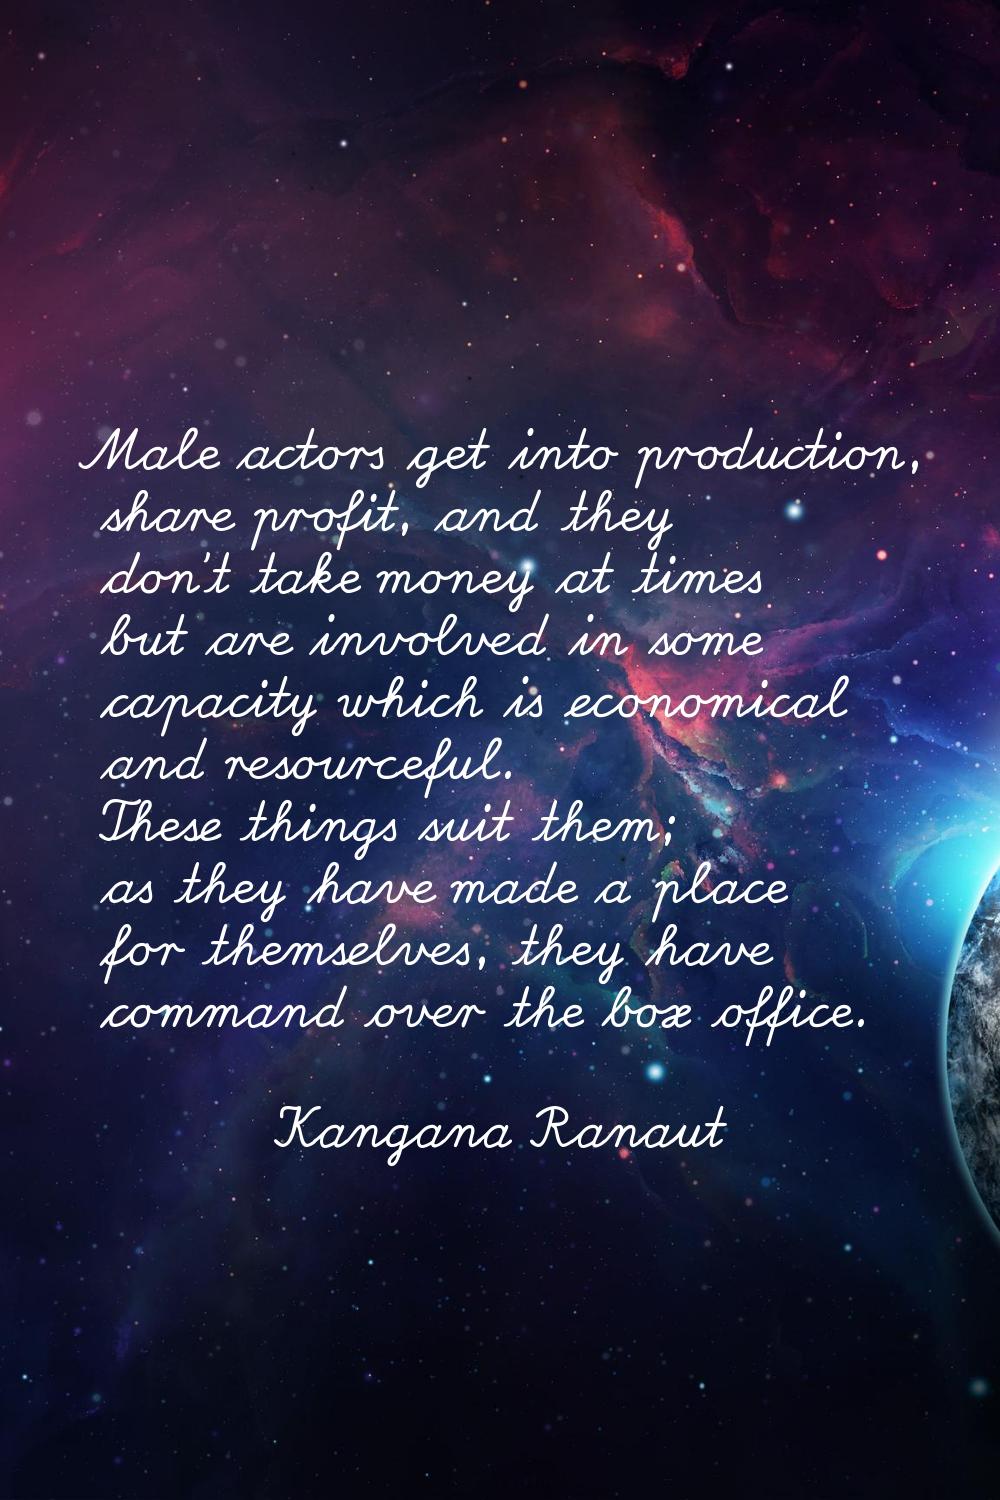 Male actors get into production, share profit, and they don't take money at times but are involved 